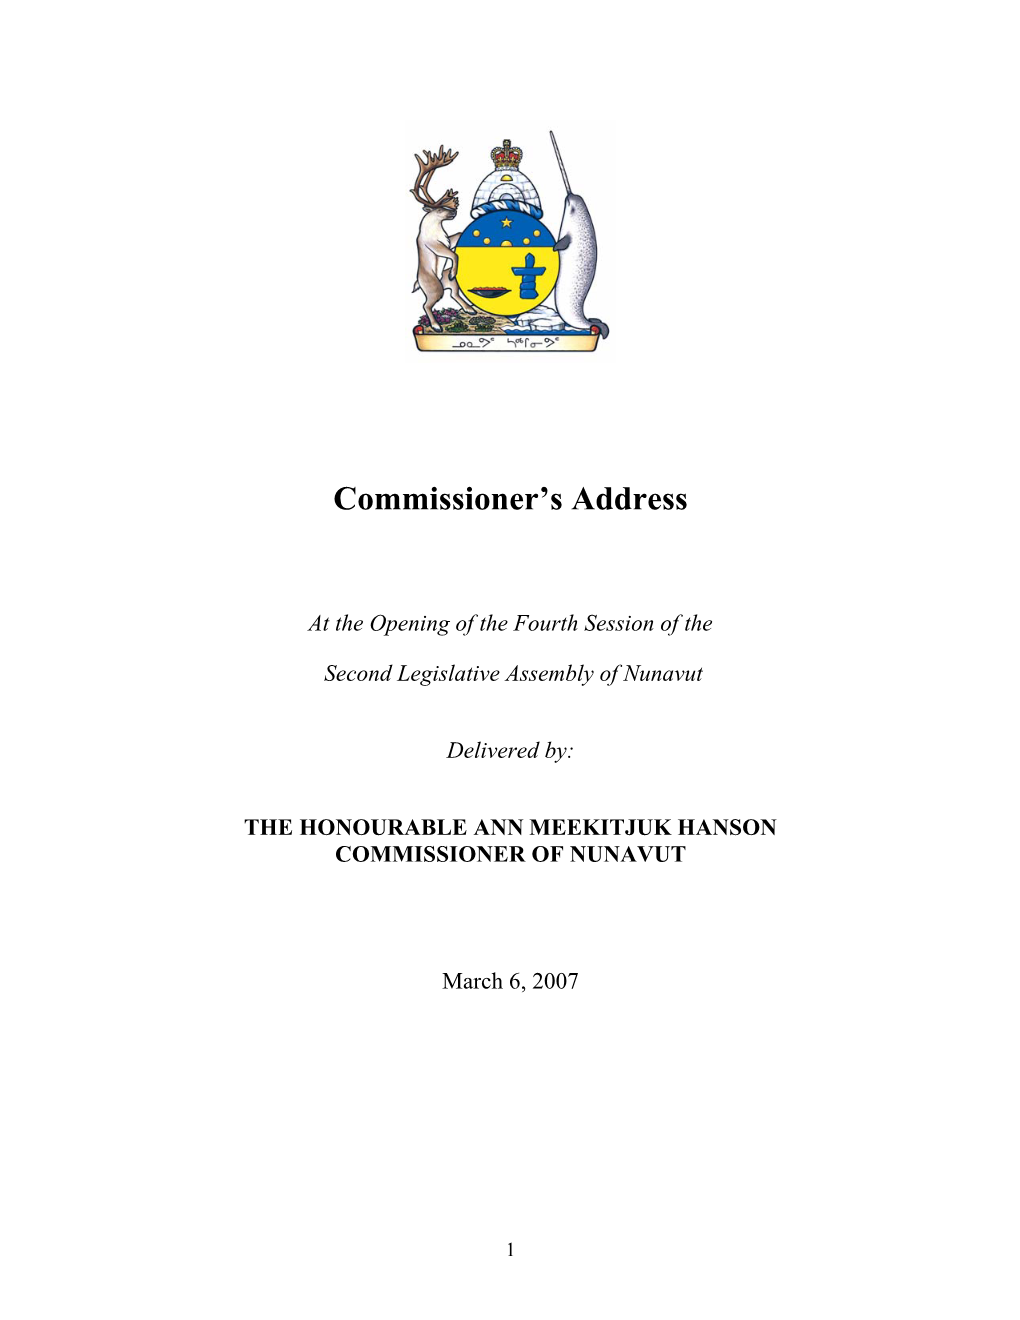 Overview of Commissioner's Address, March 2007